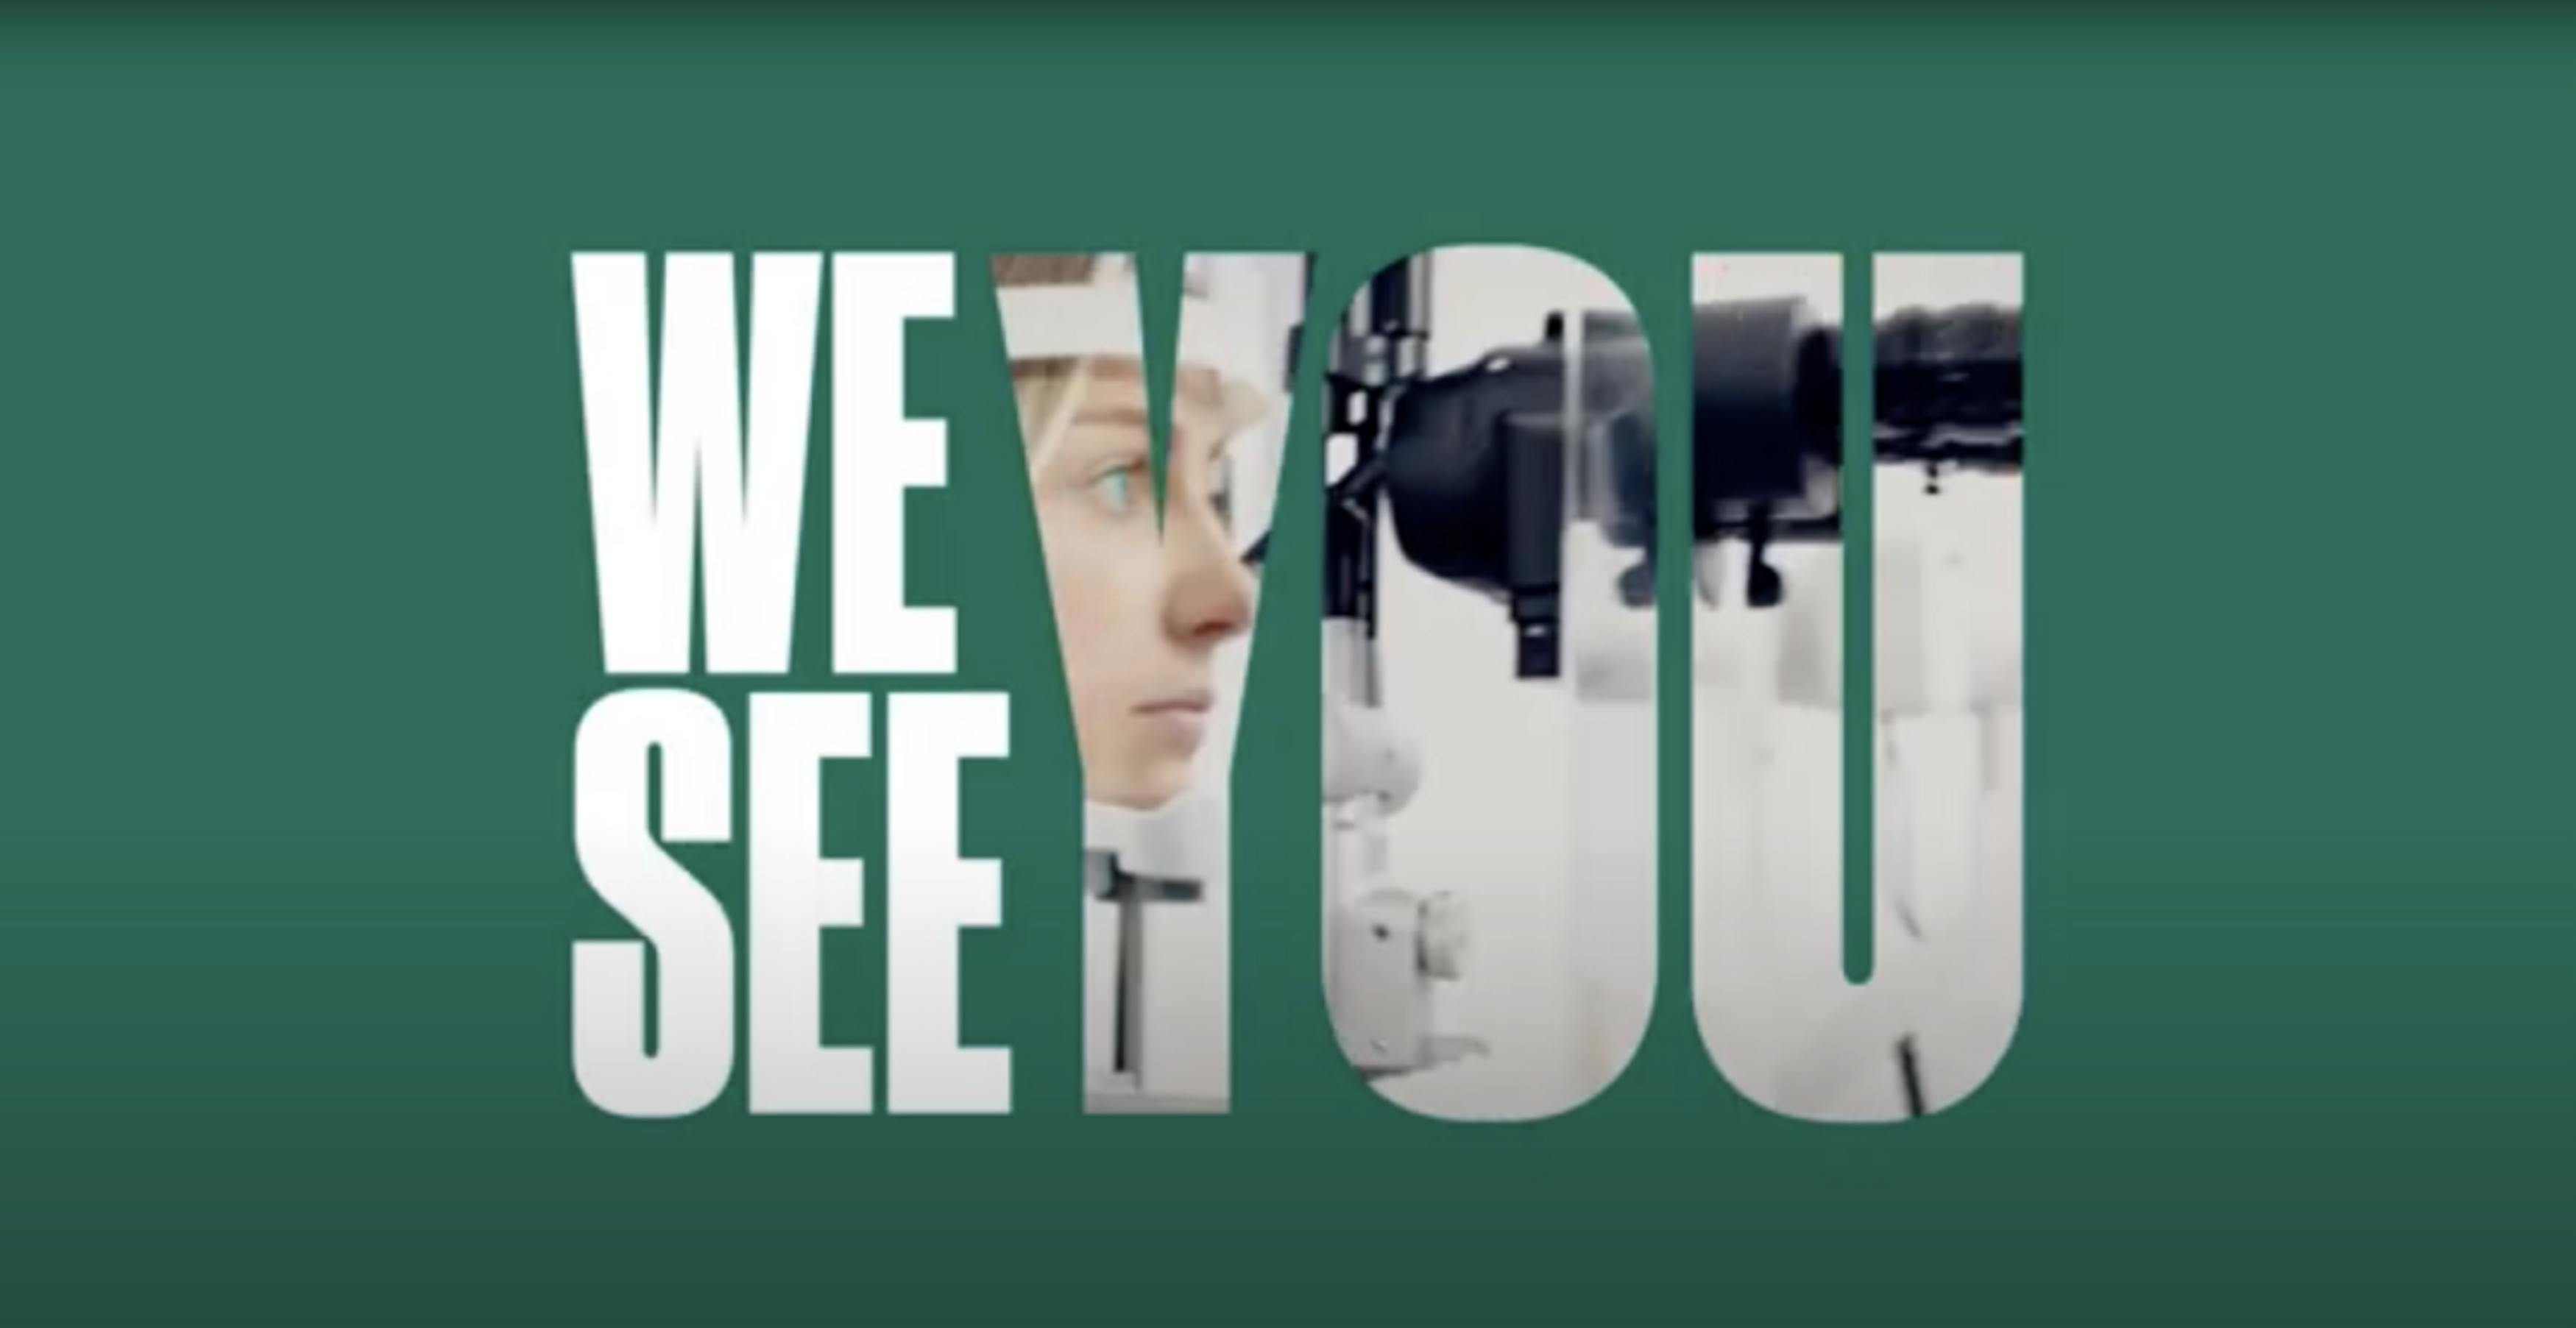 A graphic with the phrase 'WE SEE YOU' in large white letters overlaying a background image that shows a close-up of a young woman's face, with industrial or laboratory equipment visible through the transparent letters.